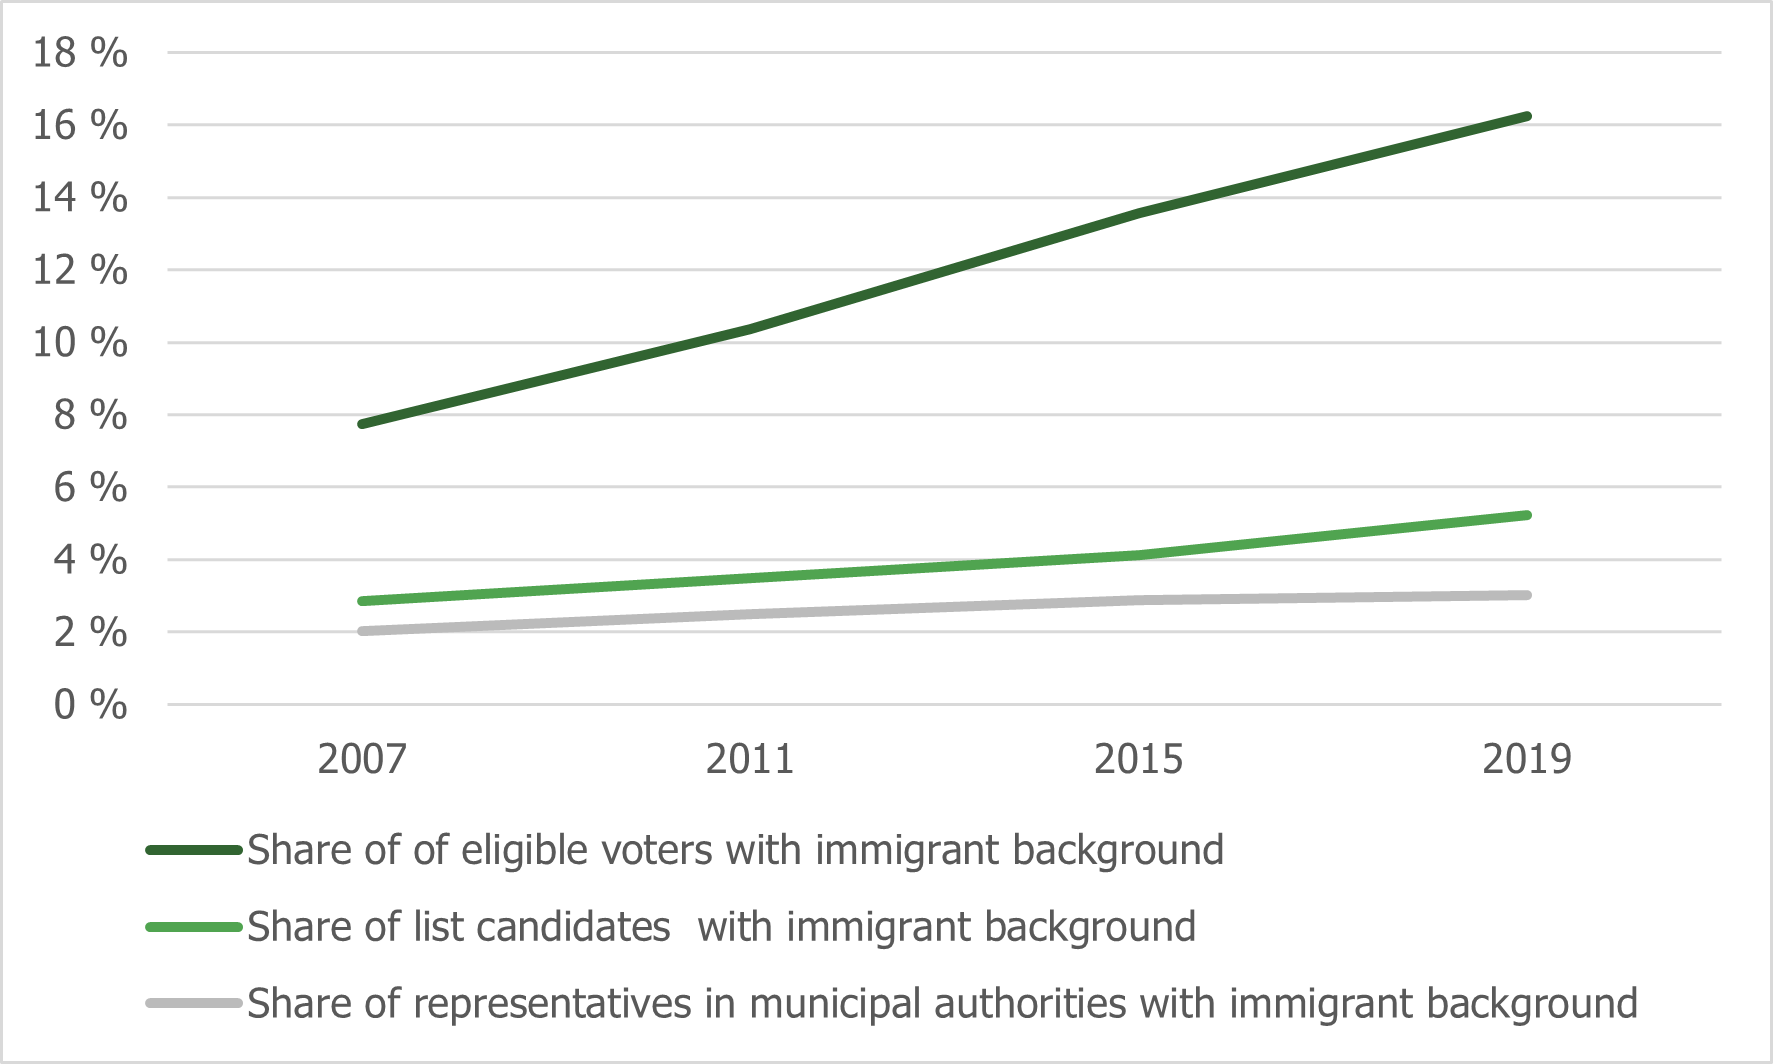 Figure 5.12. Proportion with immigrant background of eligible voters, list candidates and representatives, 2007-2019 (Statistics Norway, 2019i, 2019h, 2019g, 2019k).png